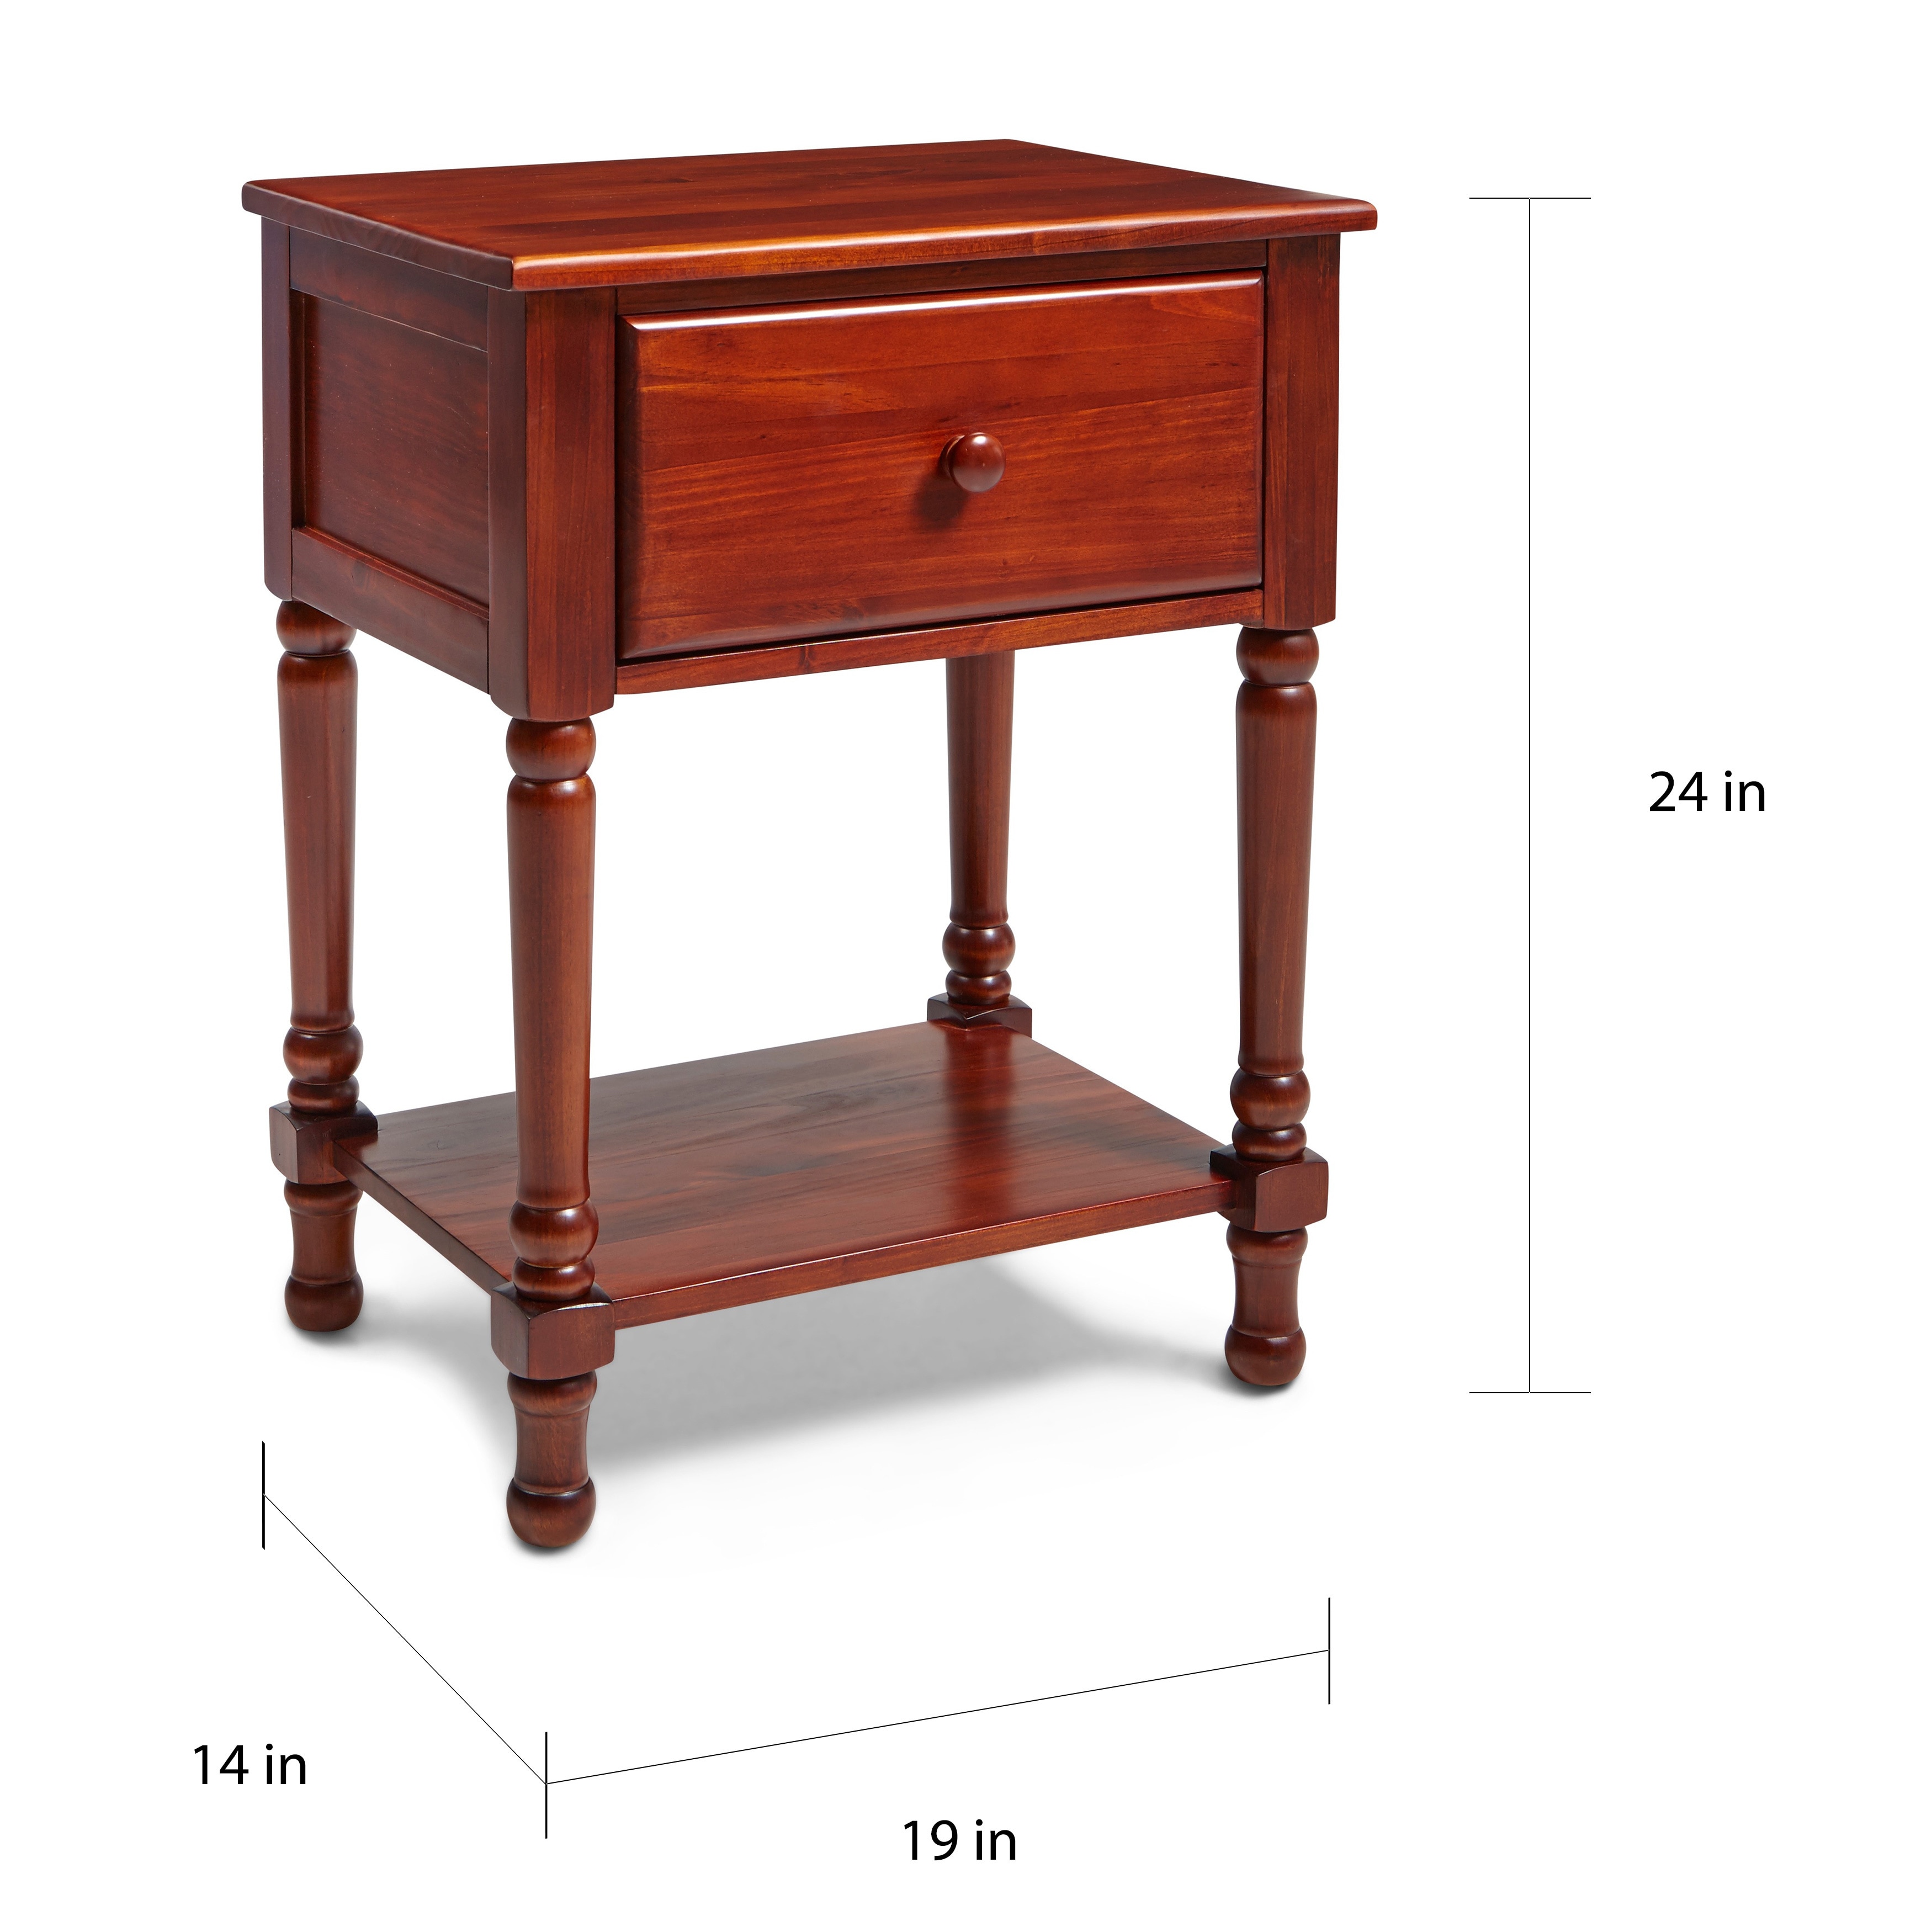 Rize Solid Wood Cherry Finish Nightstand Overstock 11442102